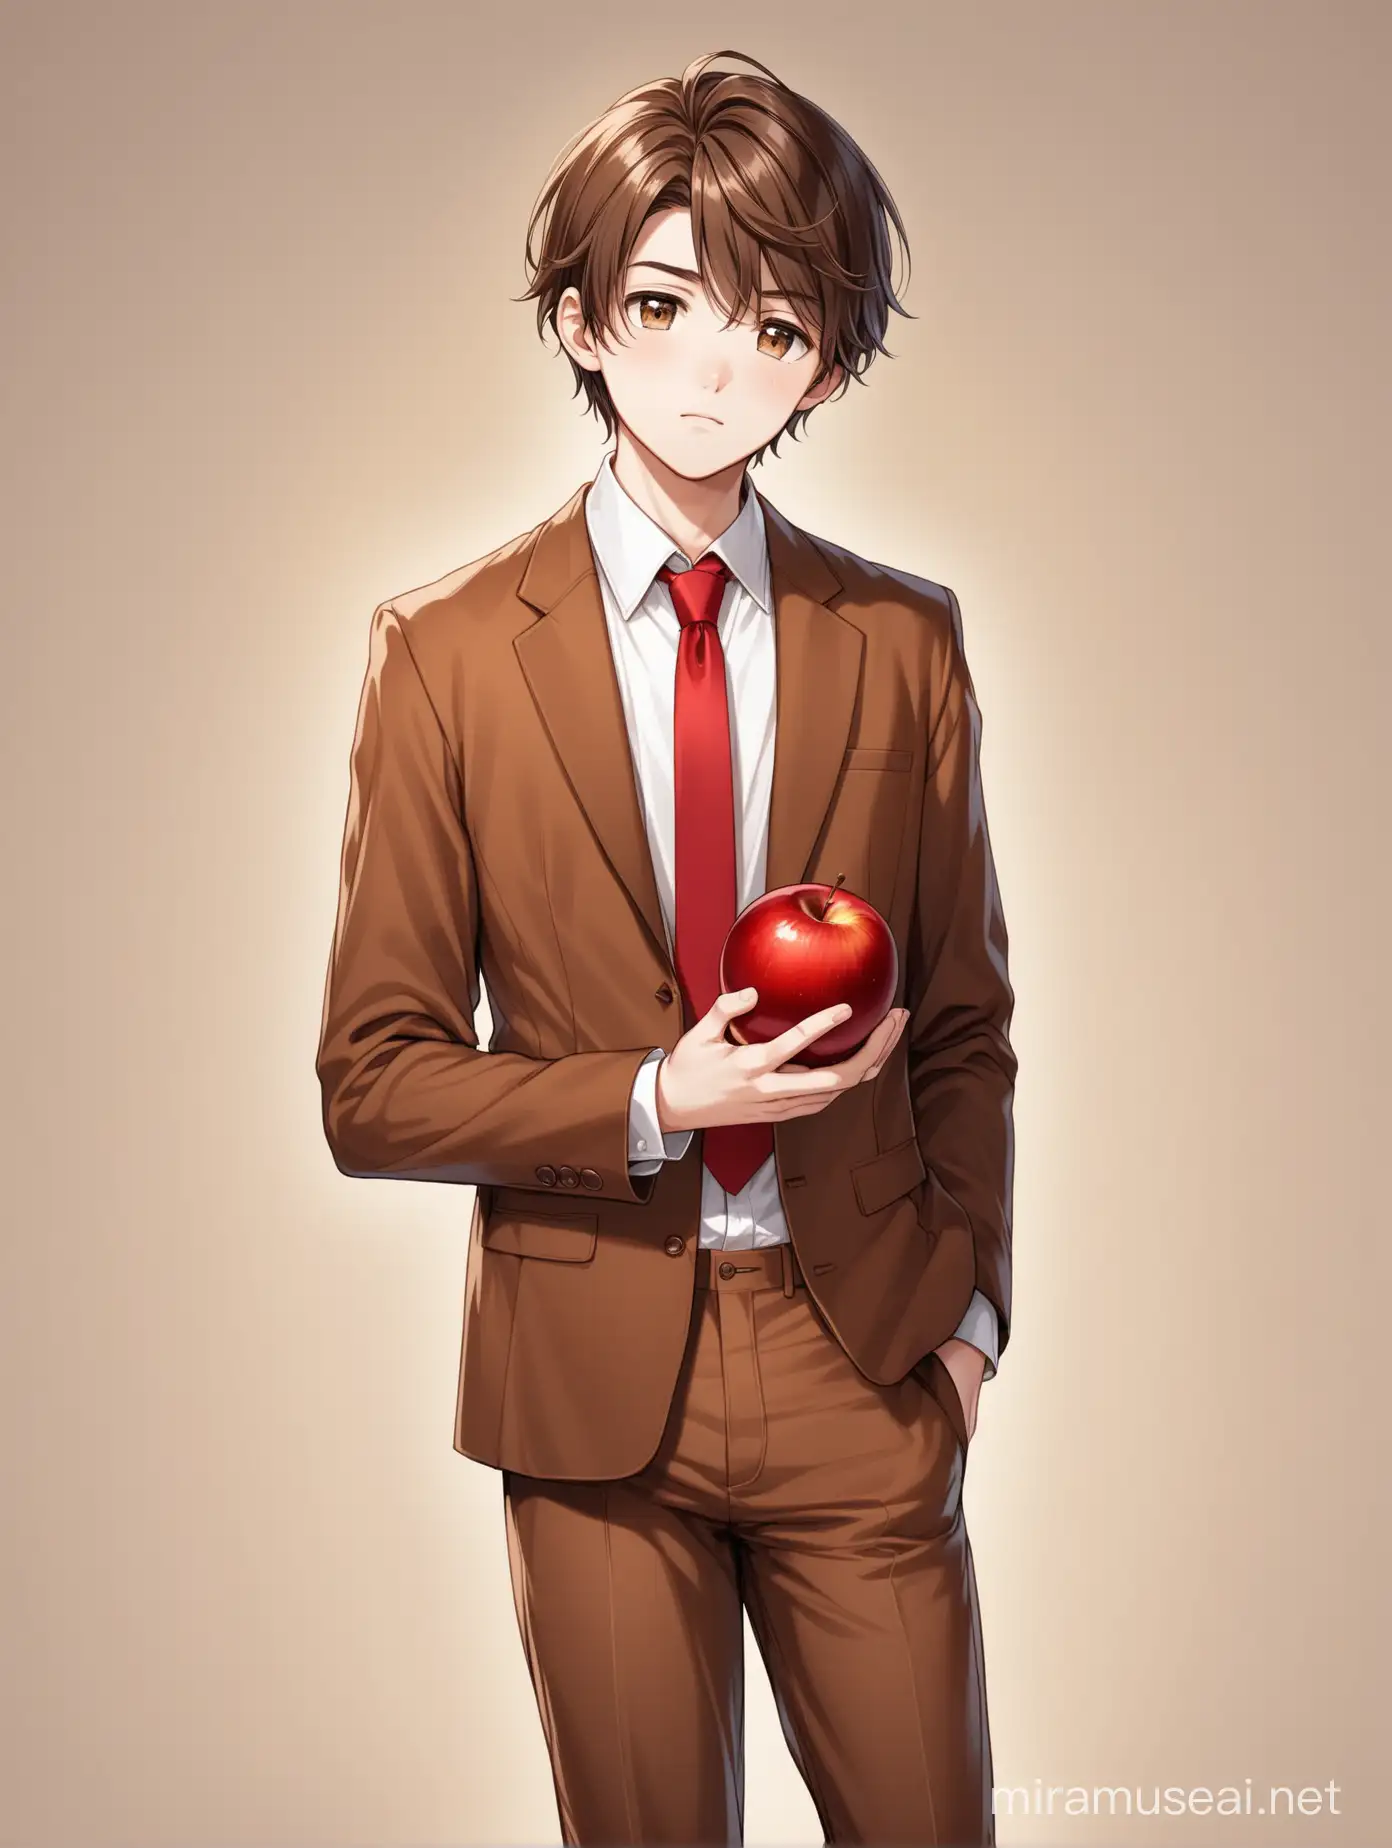 Handsome Teenager Holding Red Apple in Brown Suit